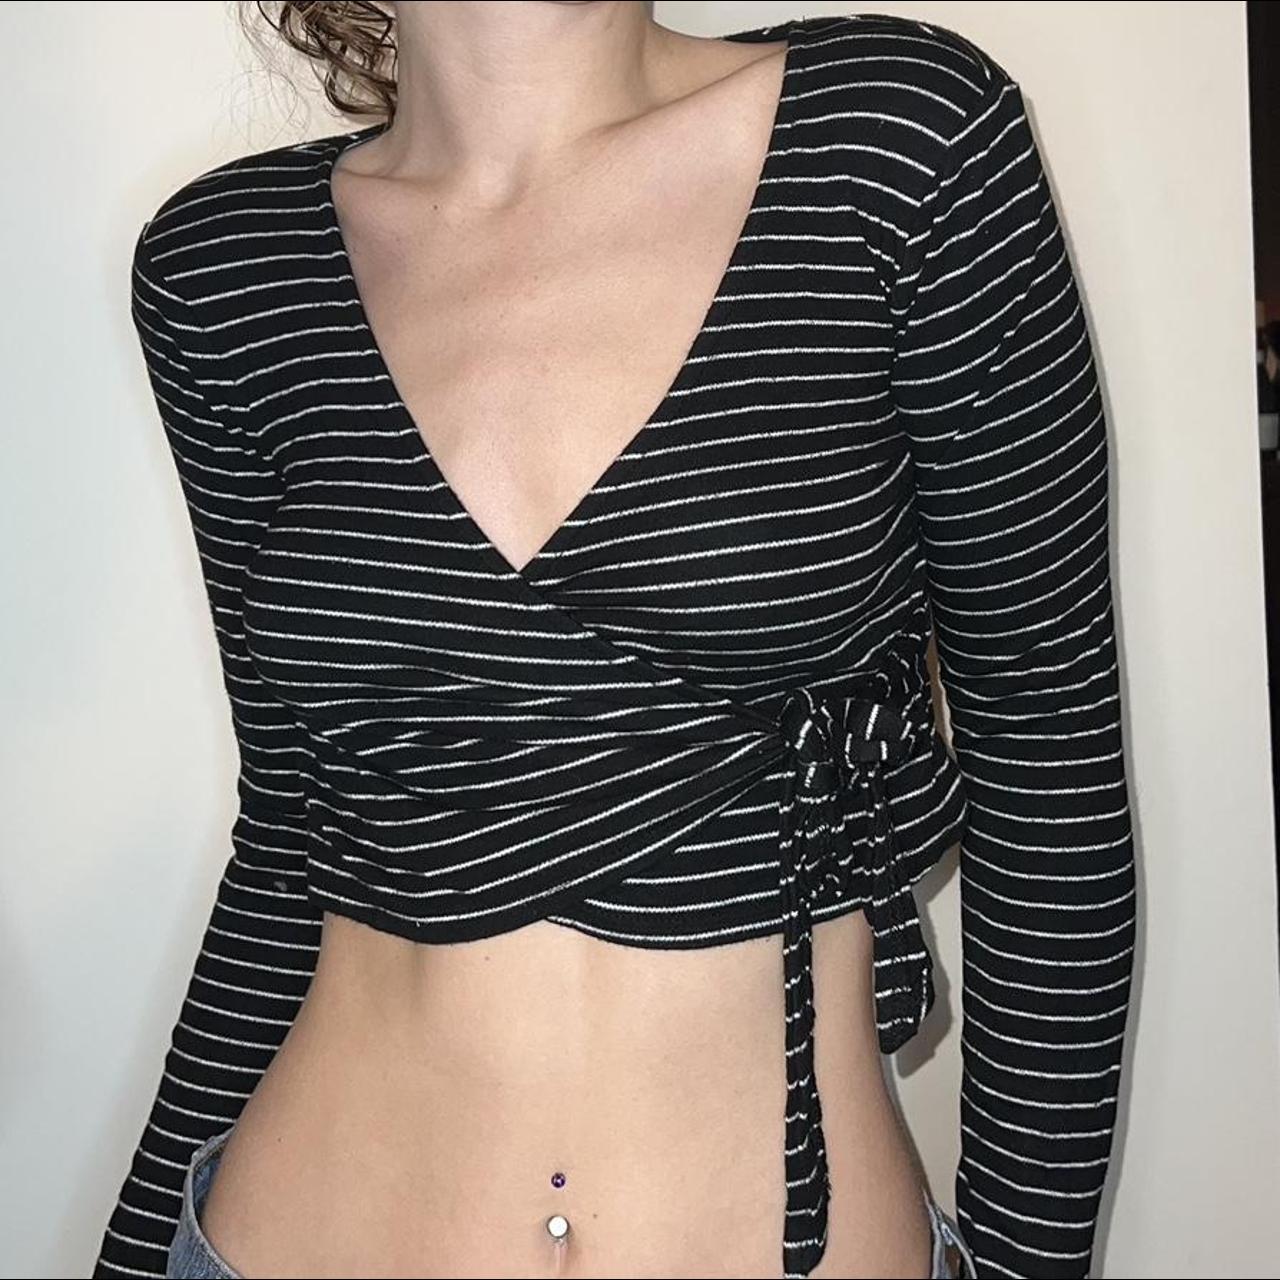 Two ballet core style tops! The first top is a wrap - Depop